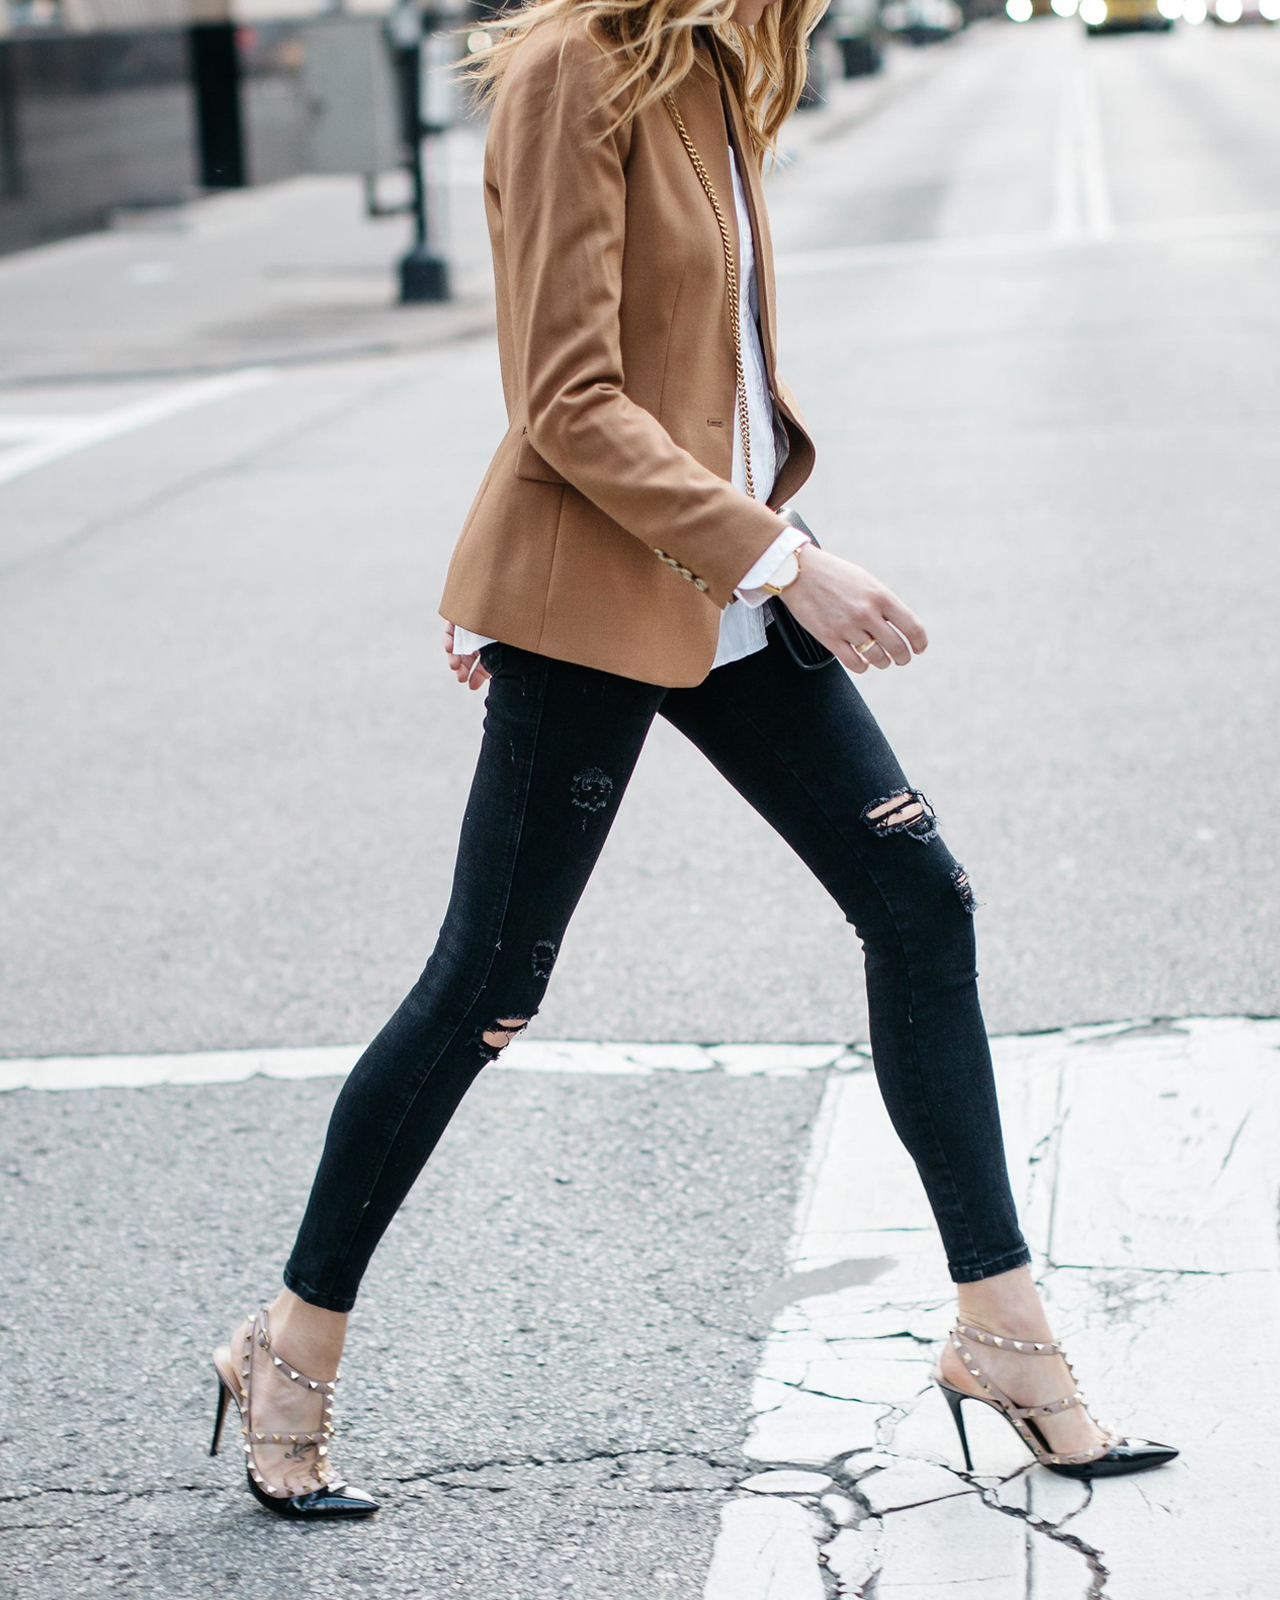 Fall Outfit, Winter Outfit, White Button-Down Shirt, Camel Blazer, Gucci Marmont Handbag, Black Ripped Skinny Jeans, Valentino Rockstud Pumps